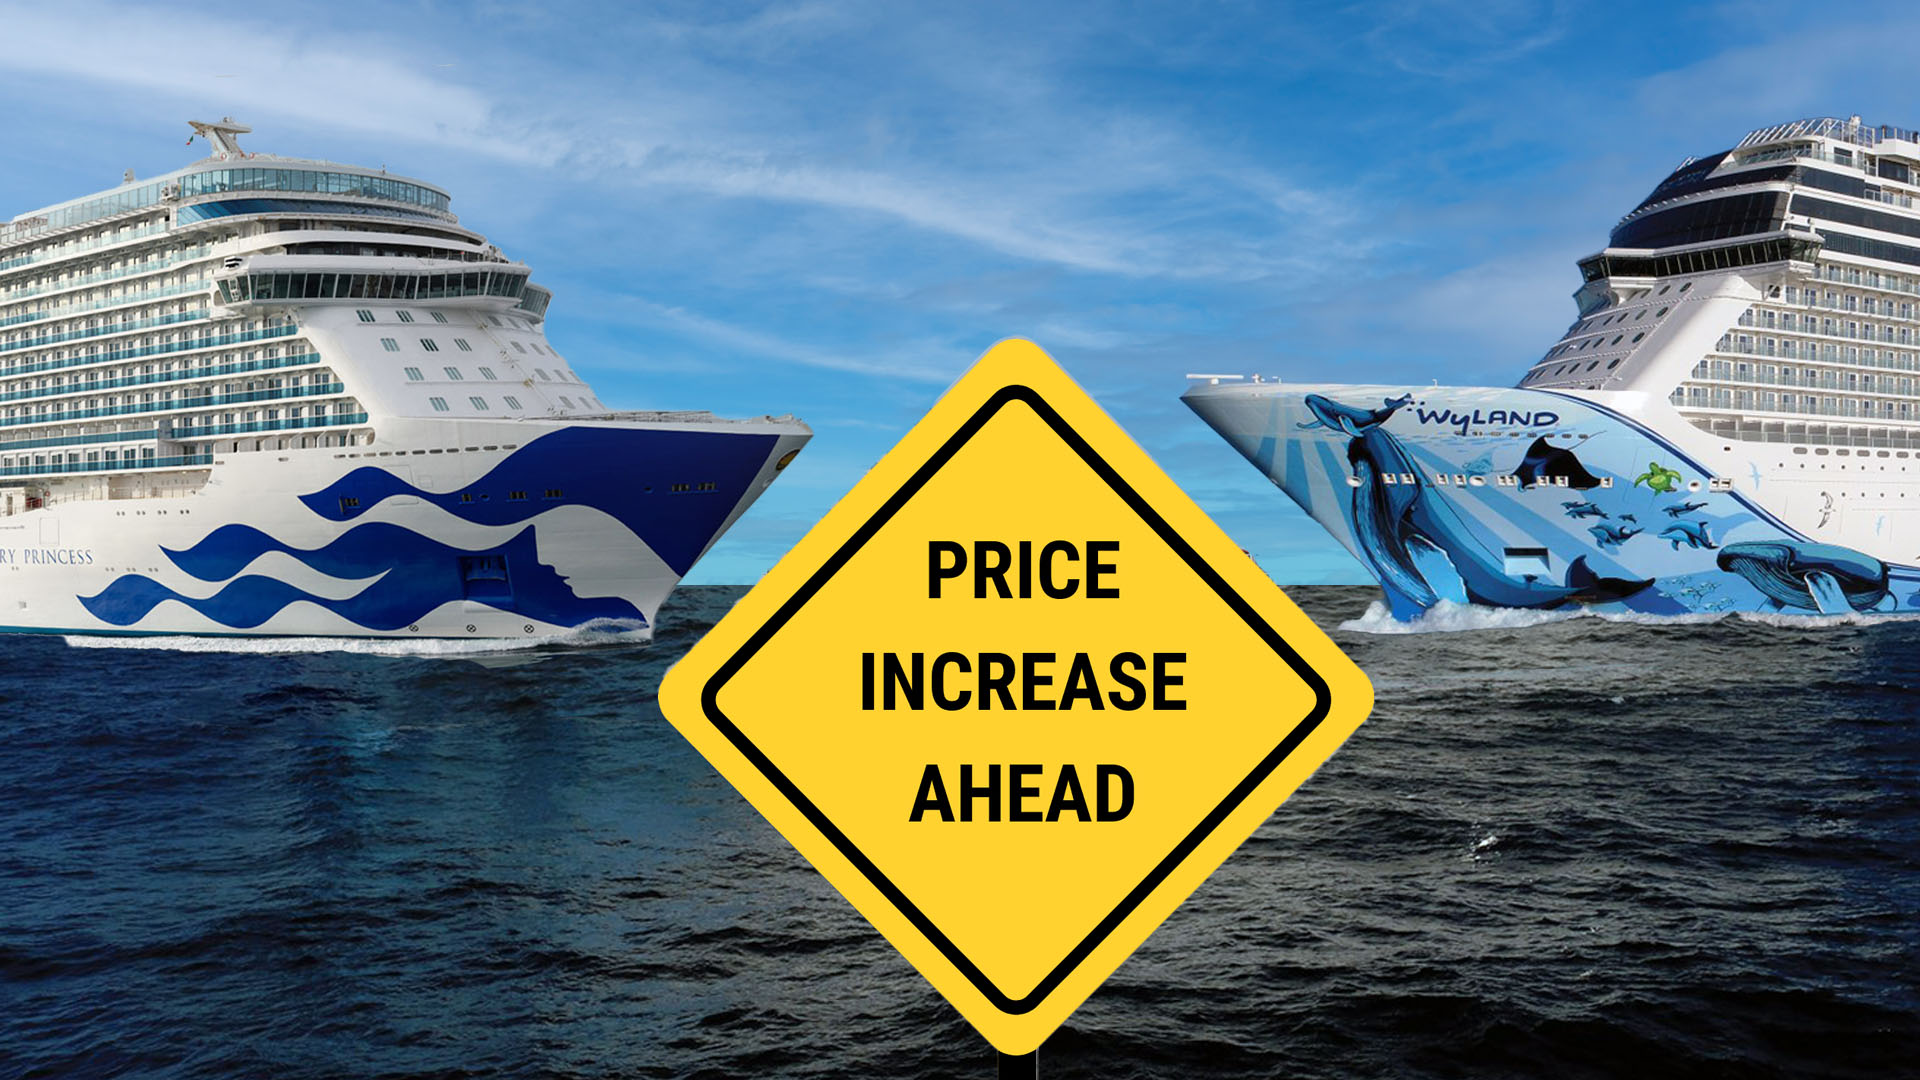 norwegian cruise line service charge